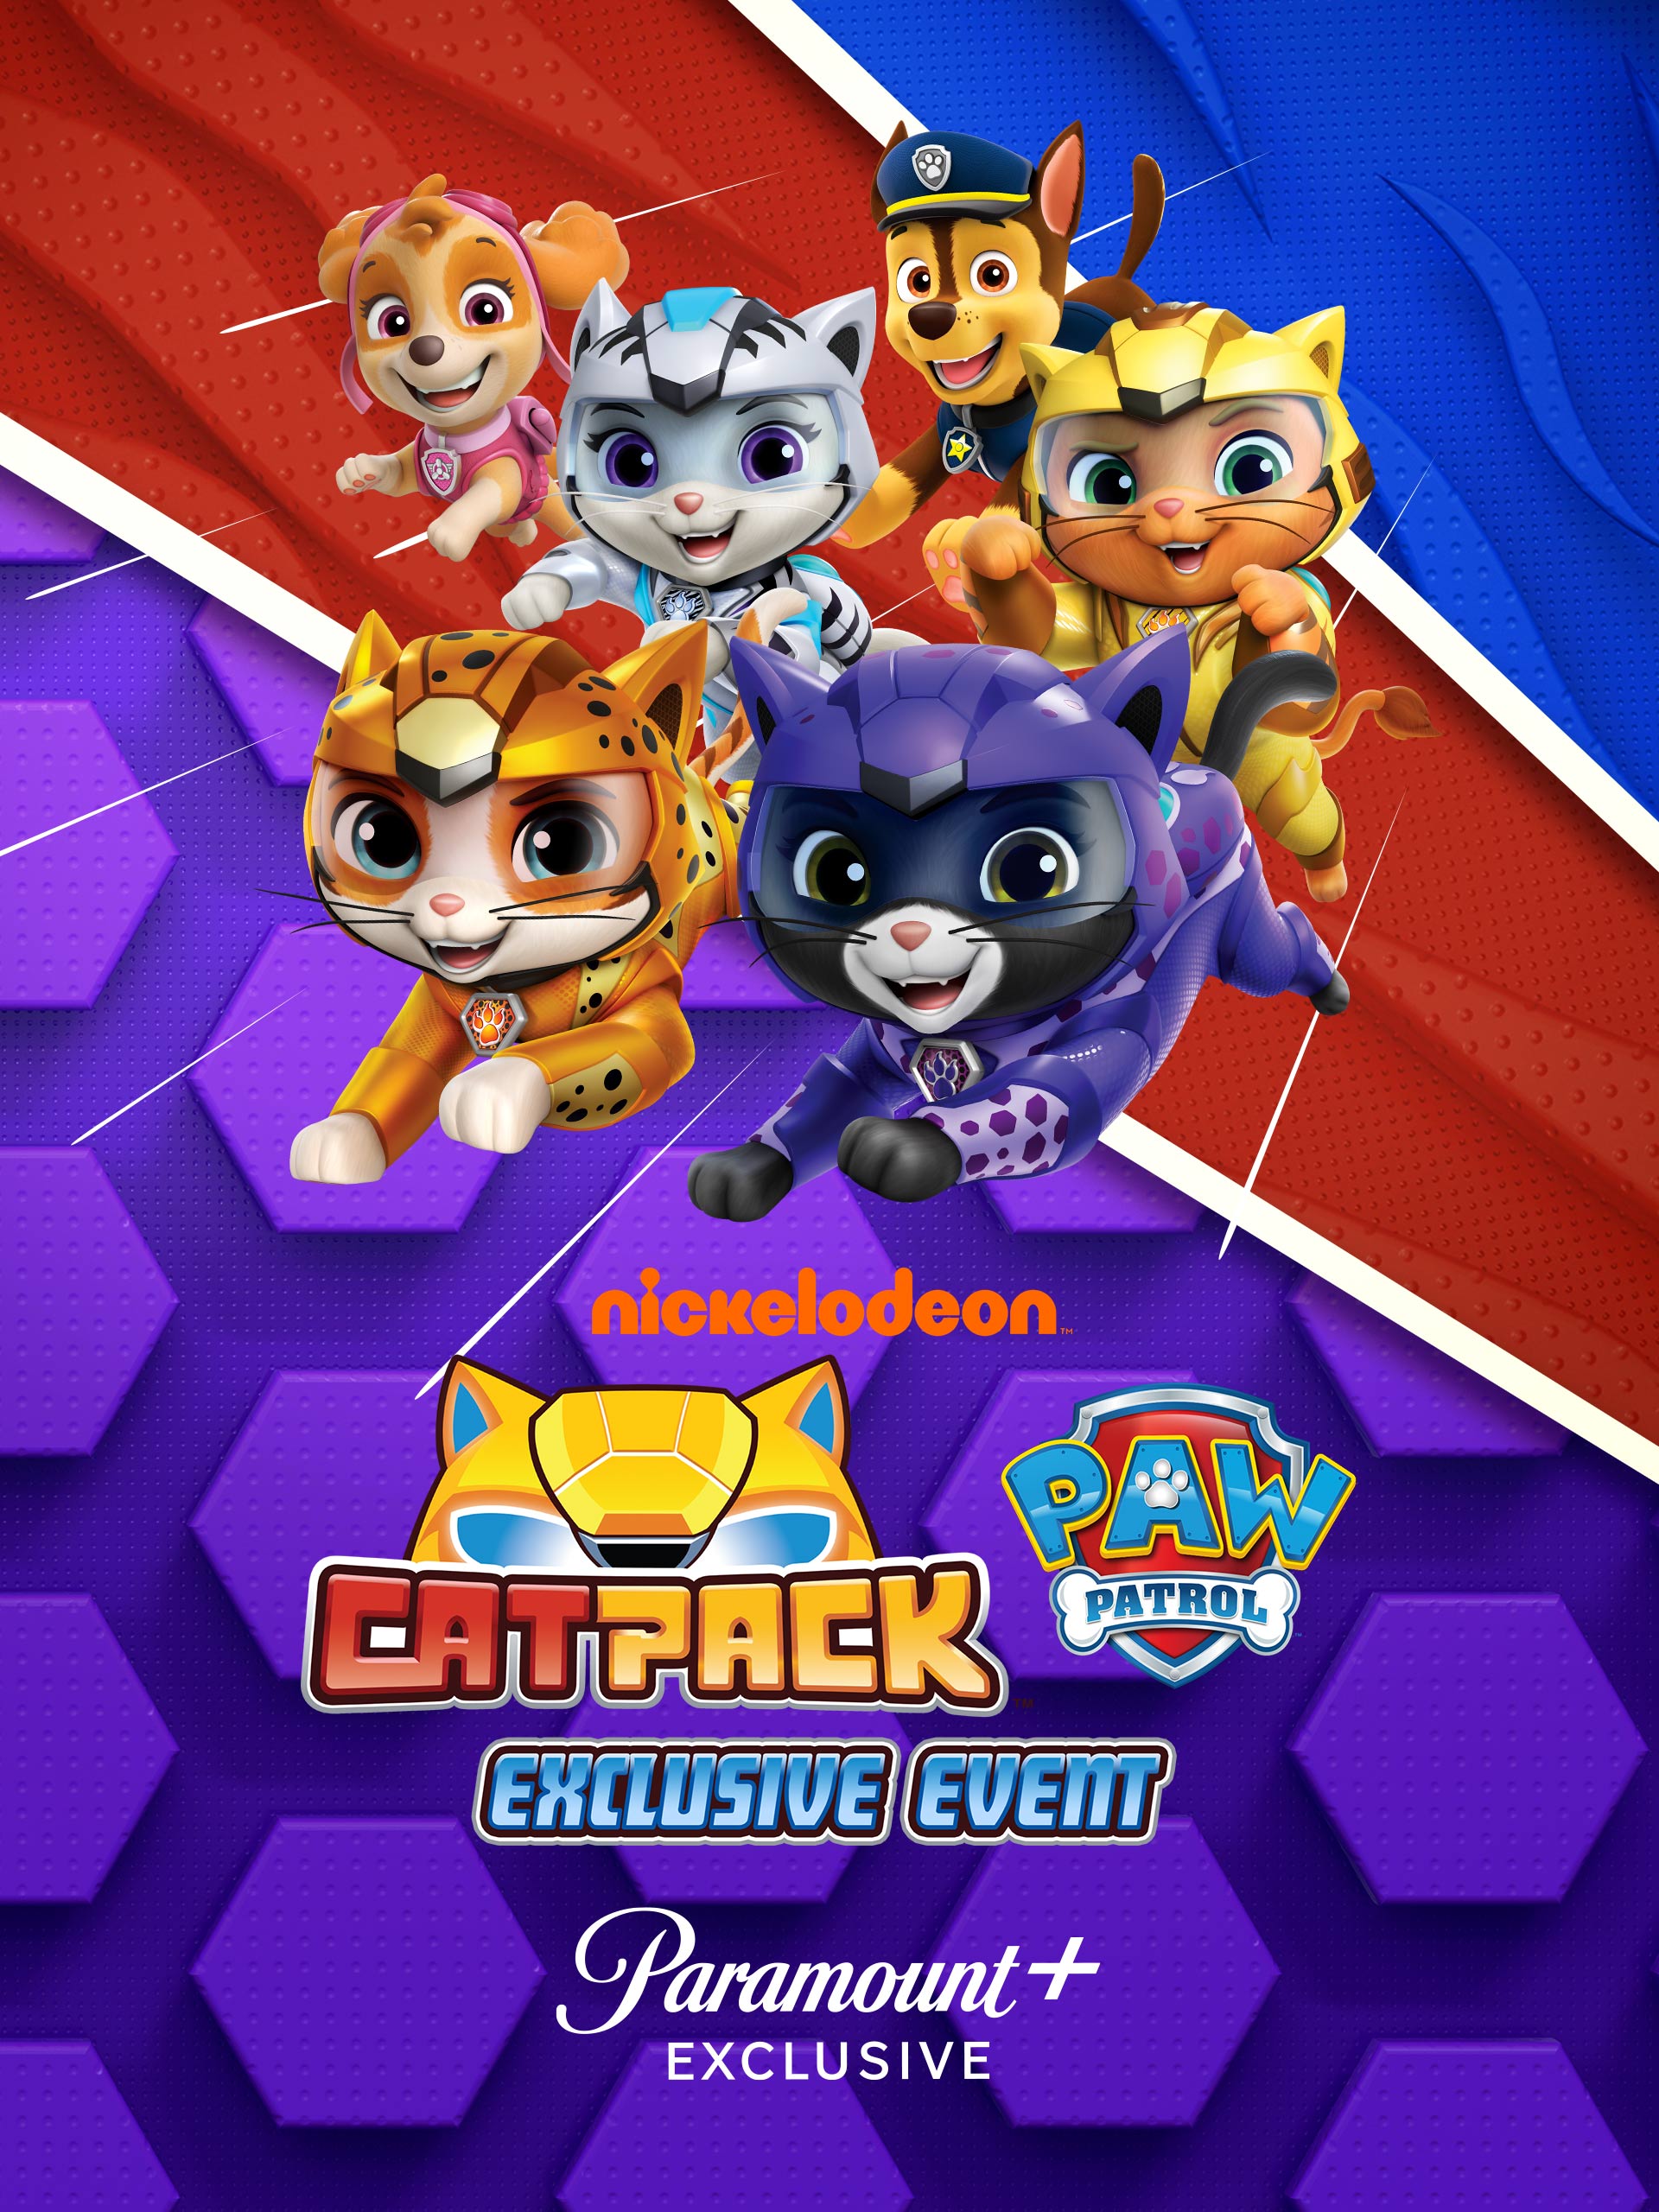 Prime Video: Cat Pack: A PAW Patrol Exclusive Event